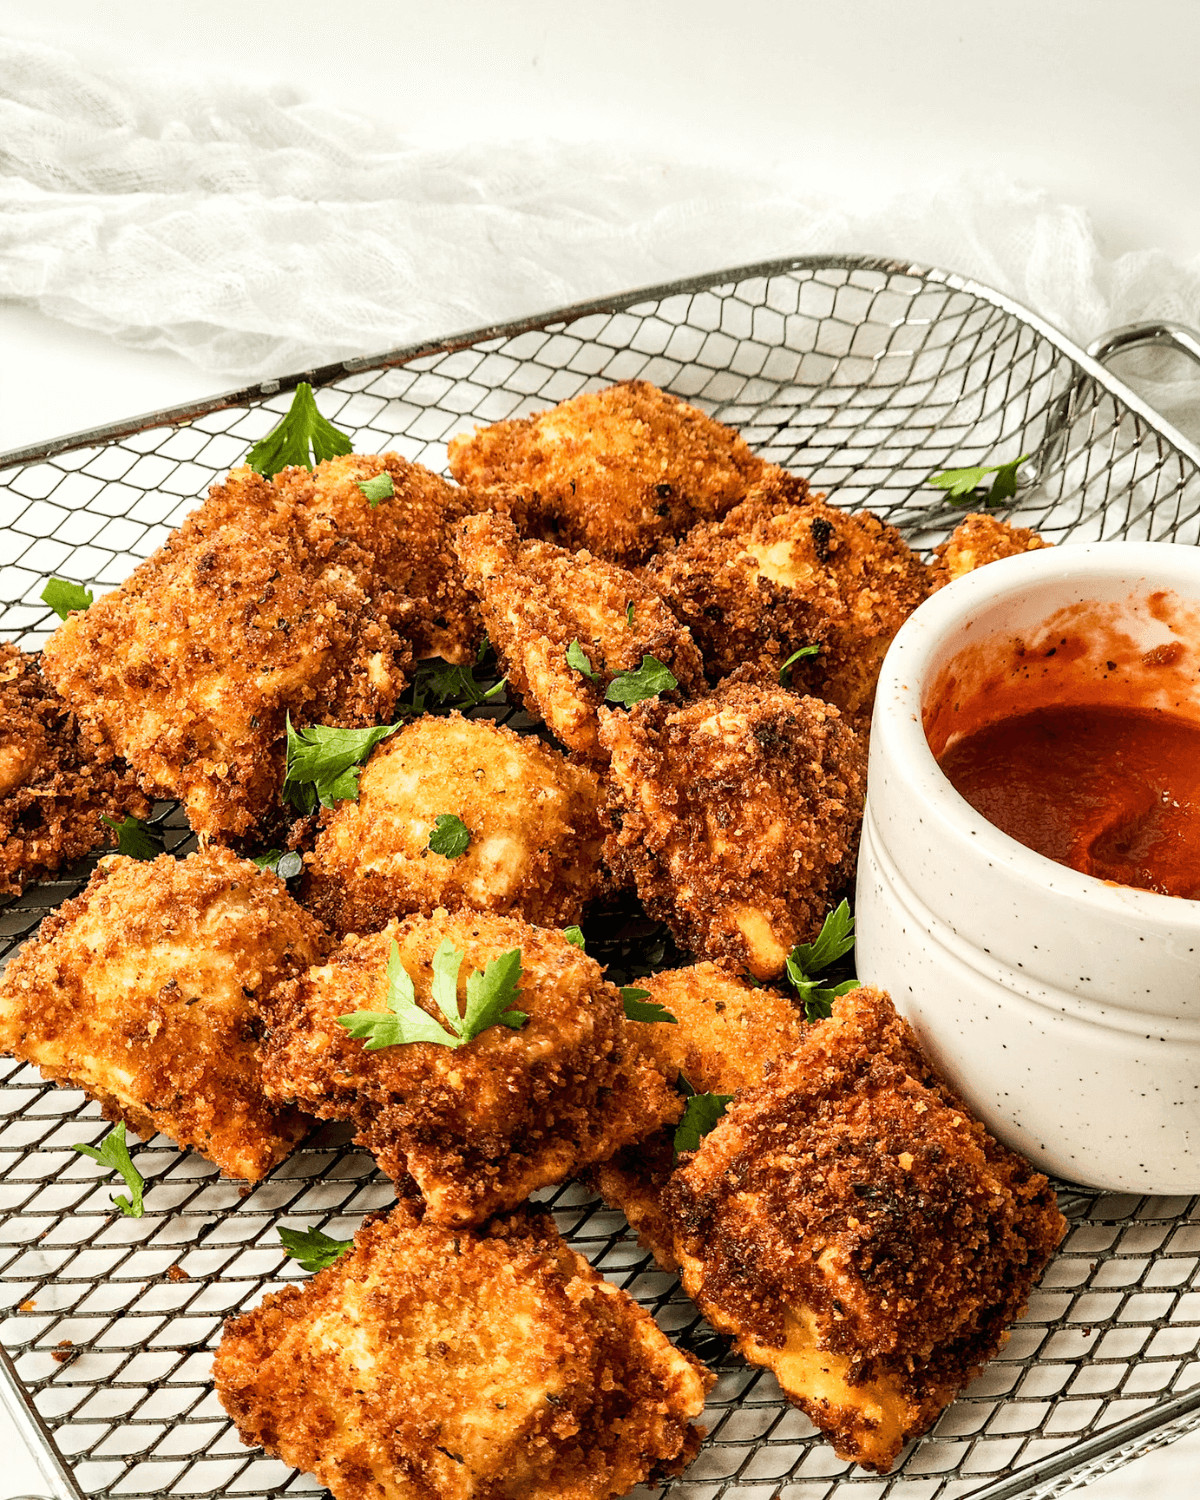 A side dish of the pan fried ravioli with dipping sauce.